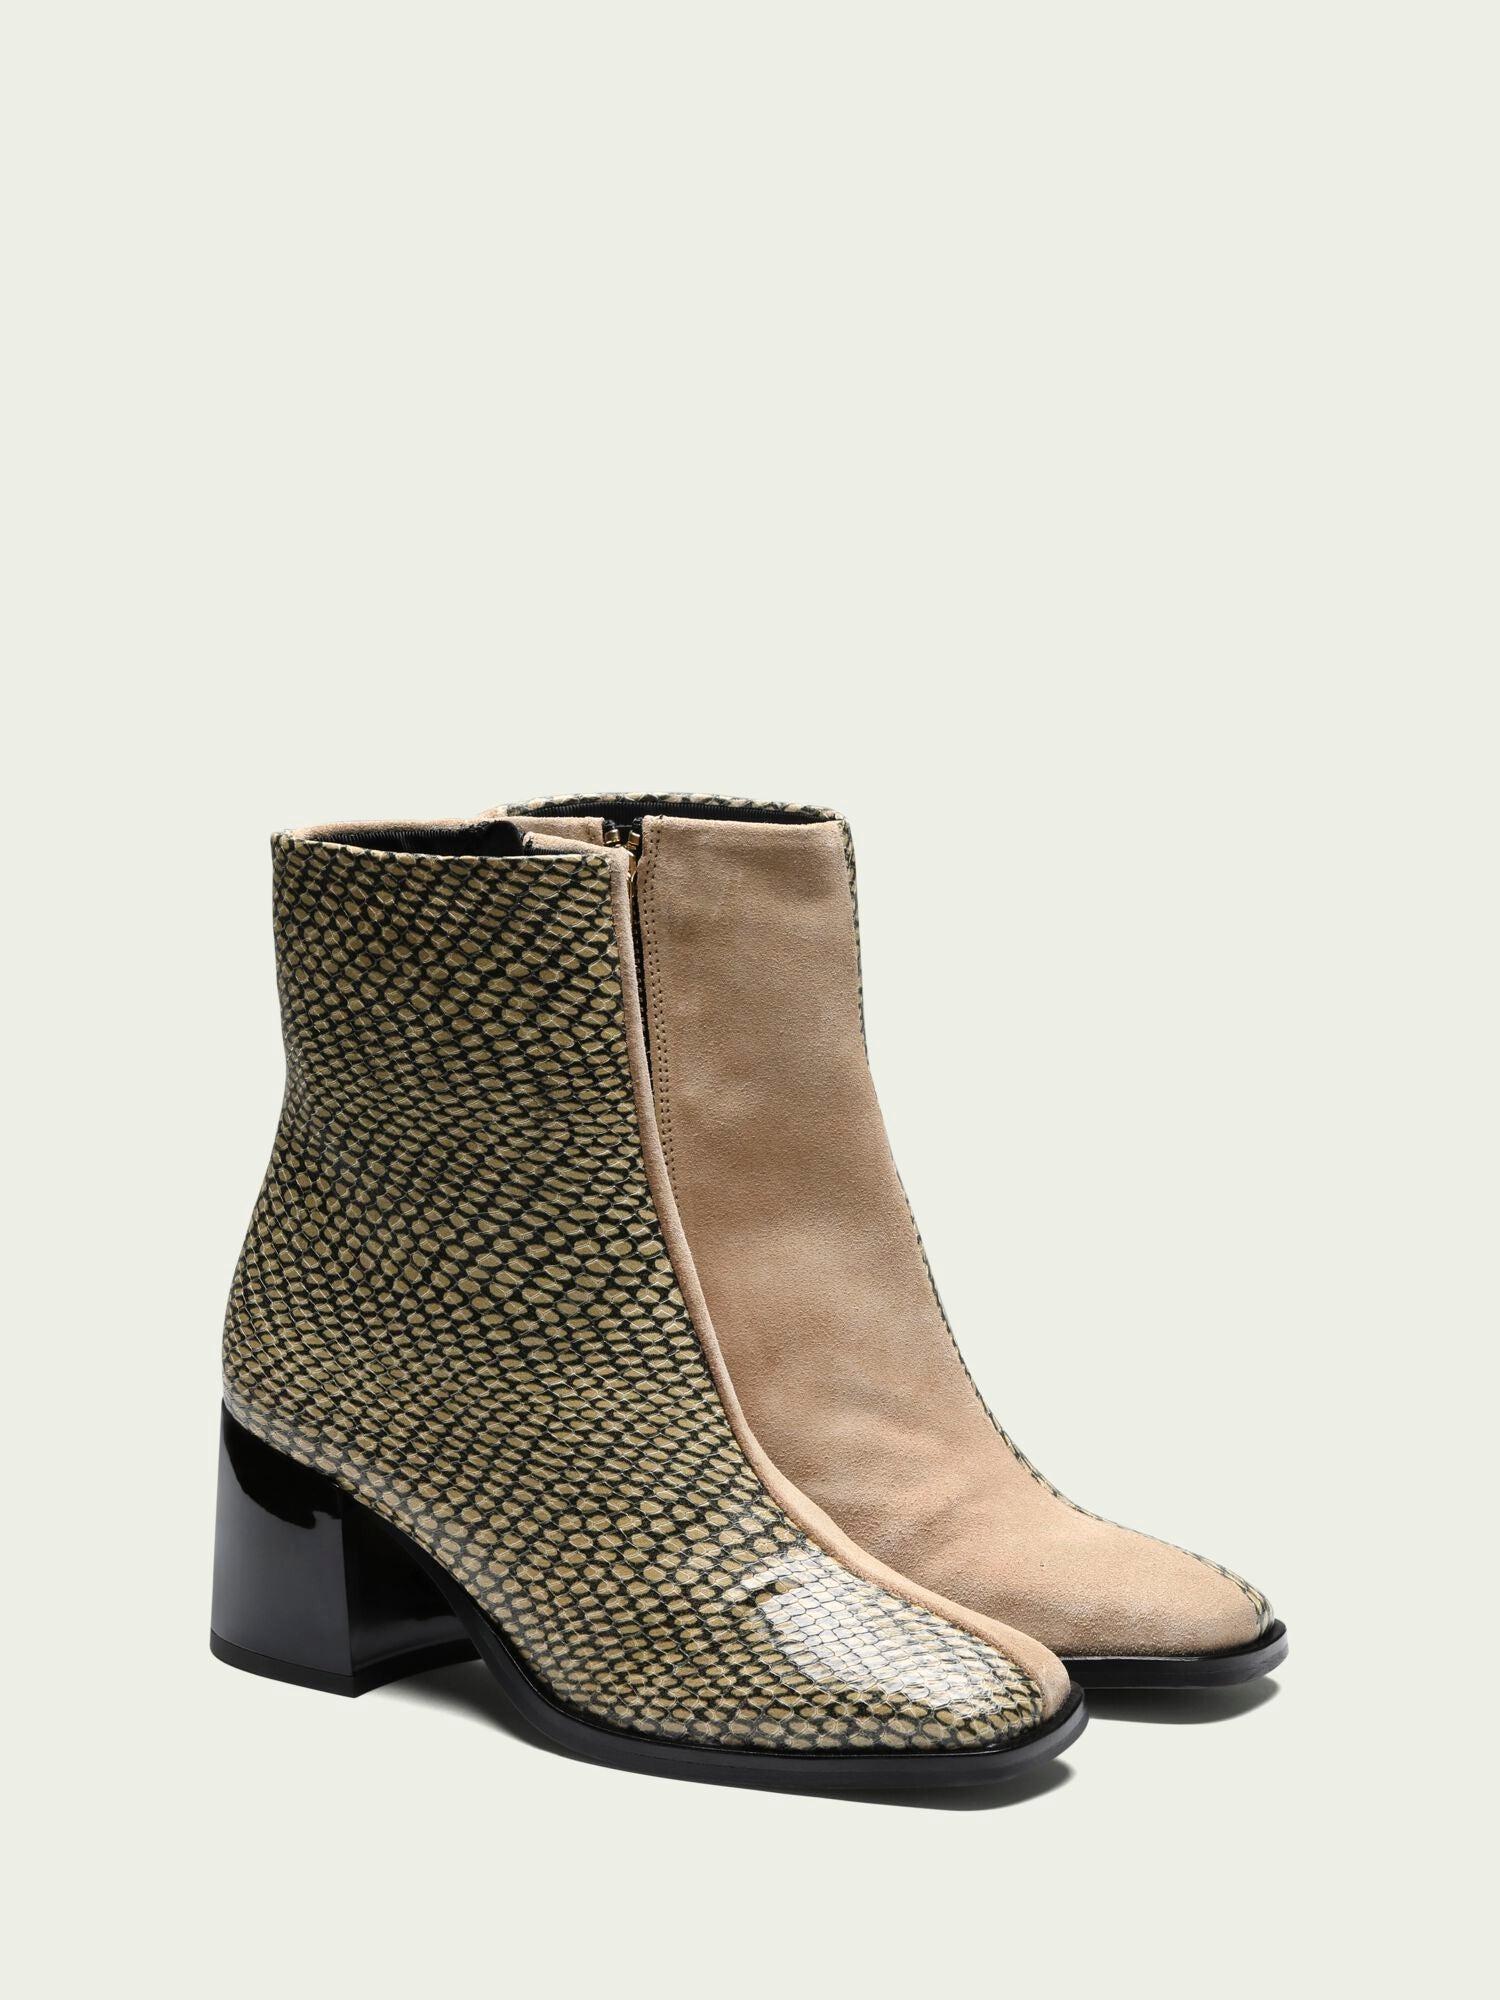 Scotch & Soda Florence - Suede Lether Ankle Boots in Natural | Lyst